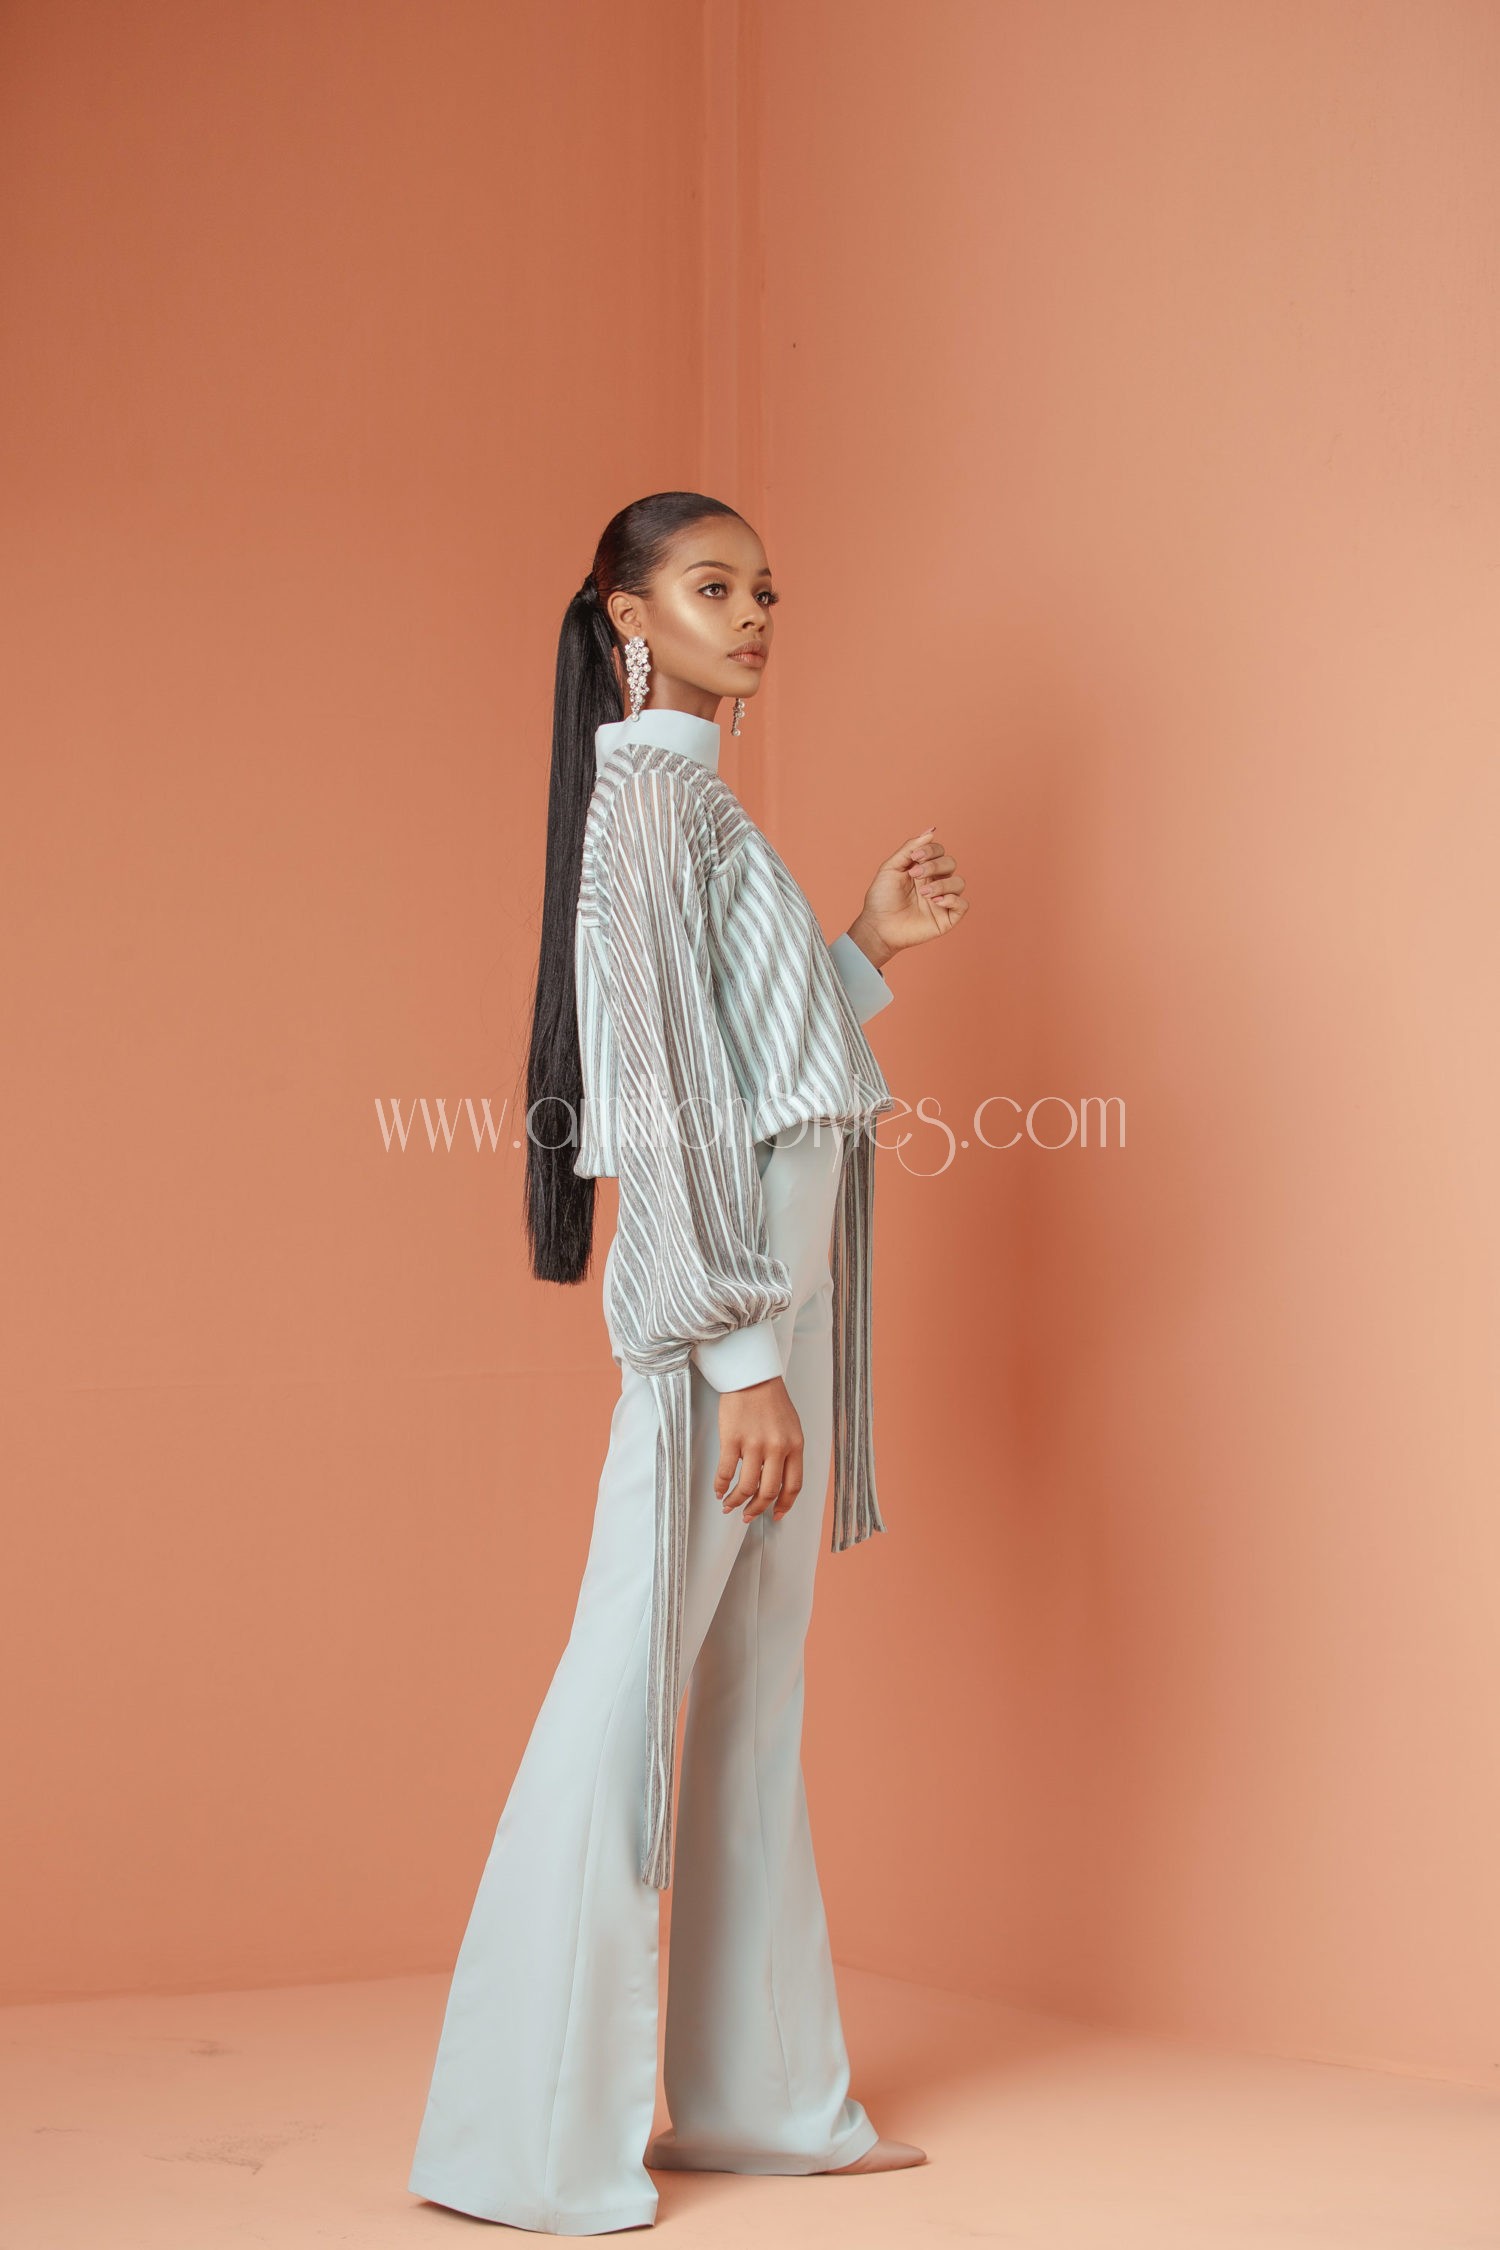 Super Chic Styles As Nigerian Brand Knanfe Releases New Collection